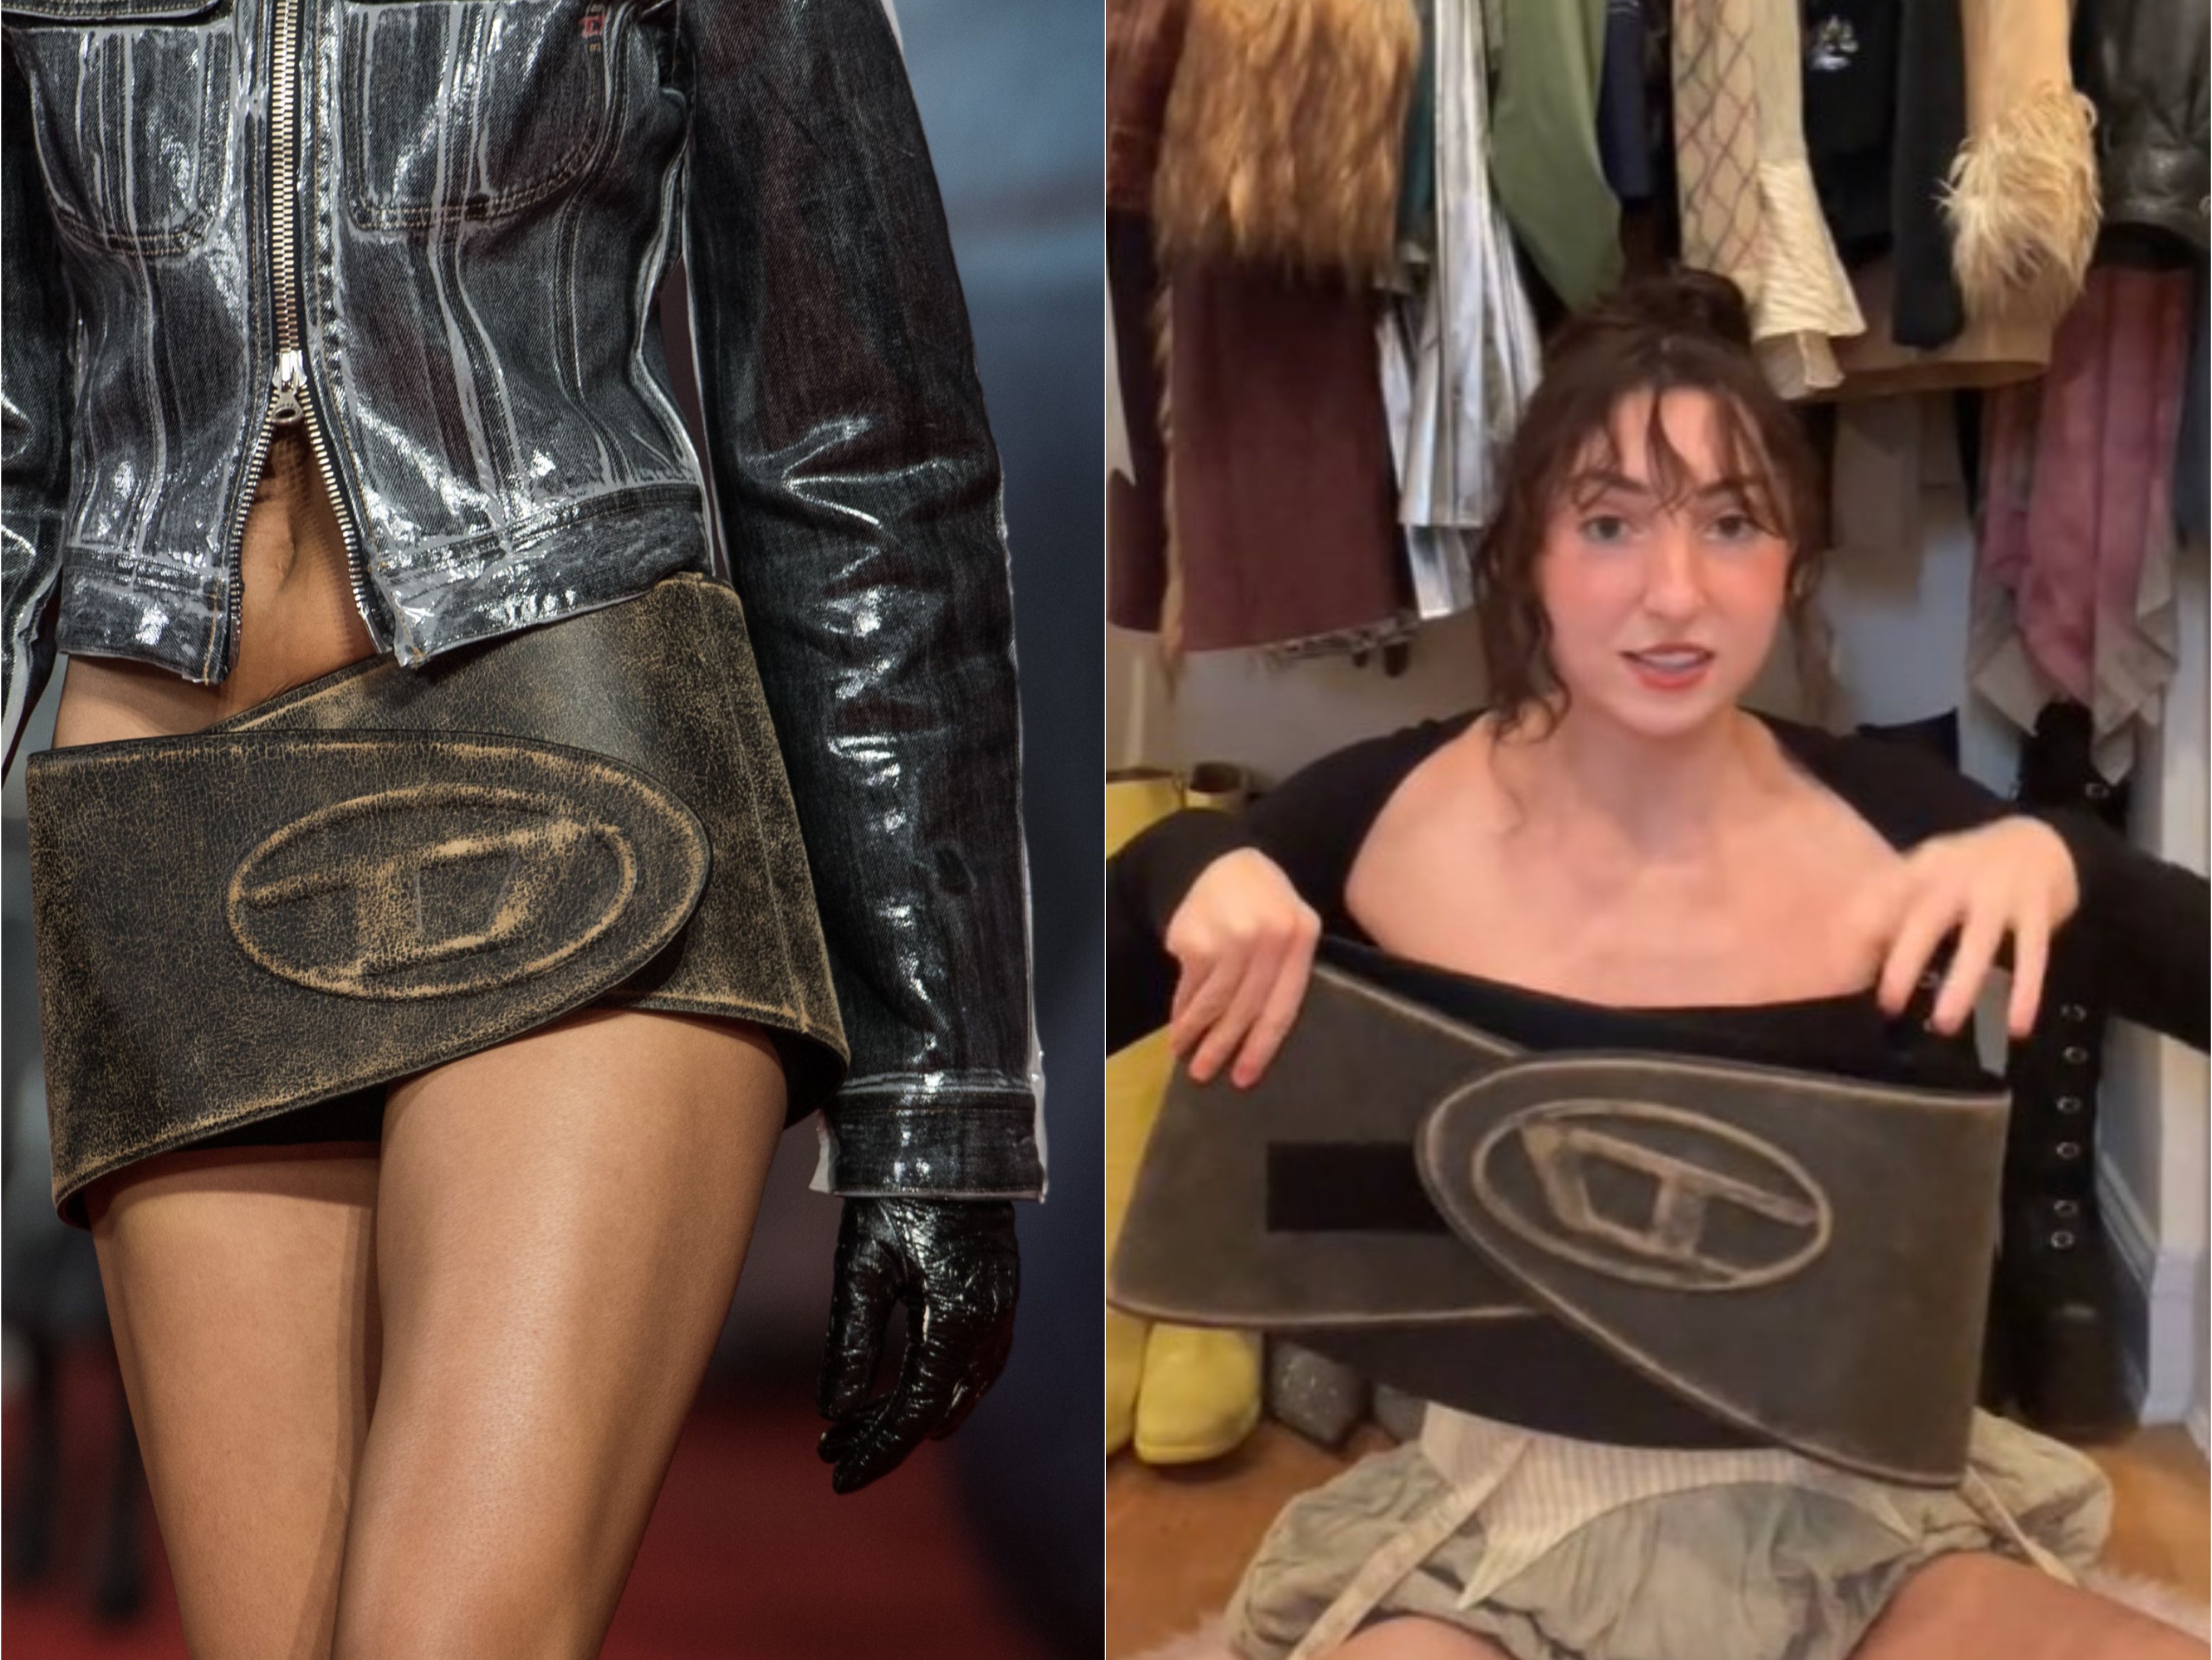 Fans confused by Diesel's £800 'belt/skirt' with Velcro closure